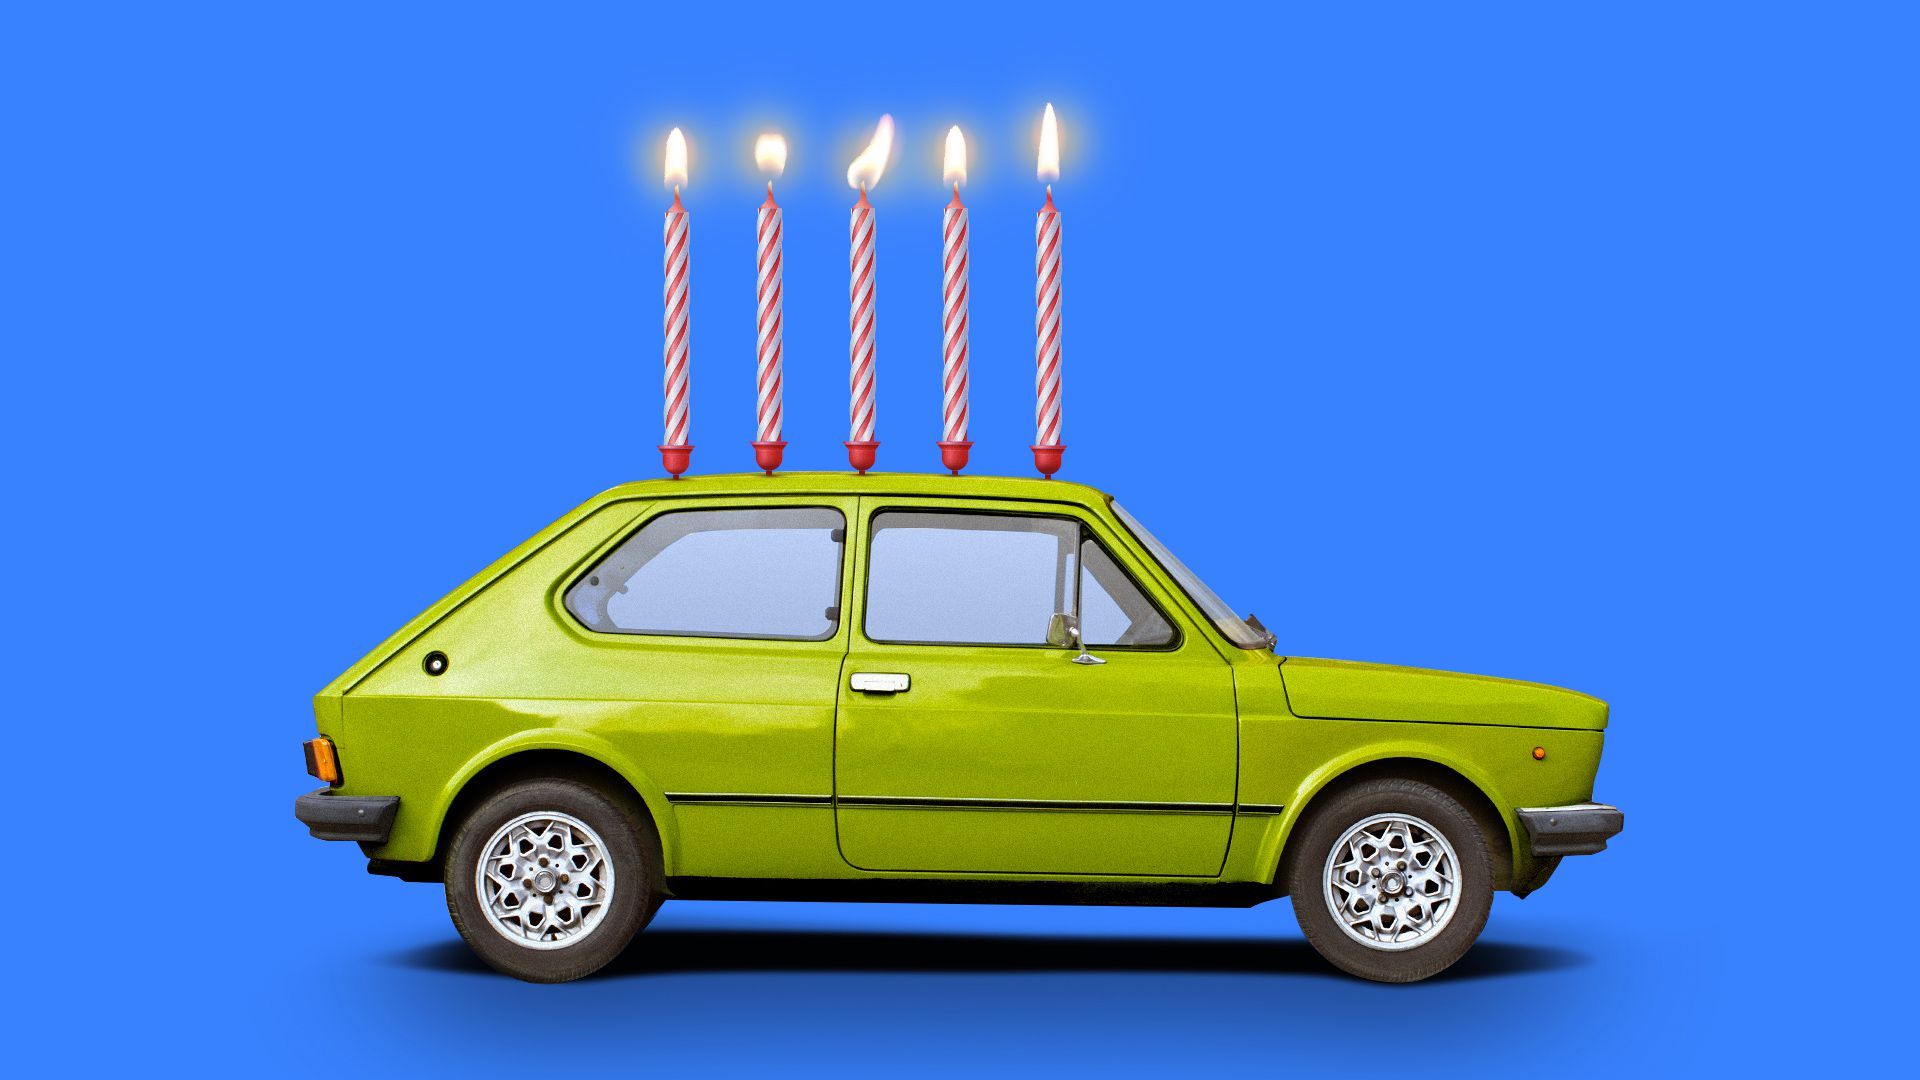 Illustration of a car with birthday candles on it.   